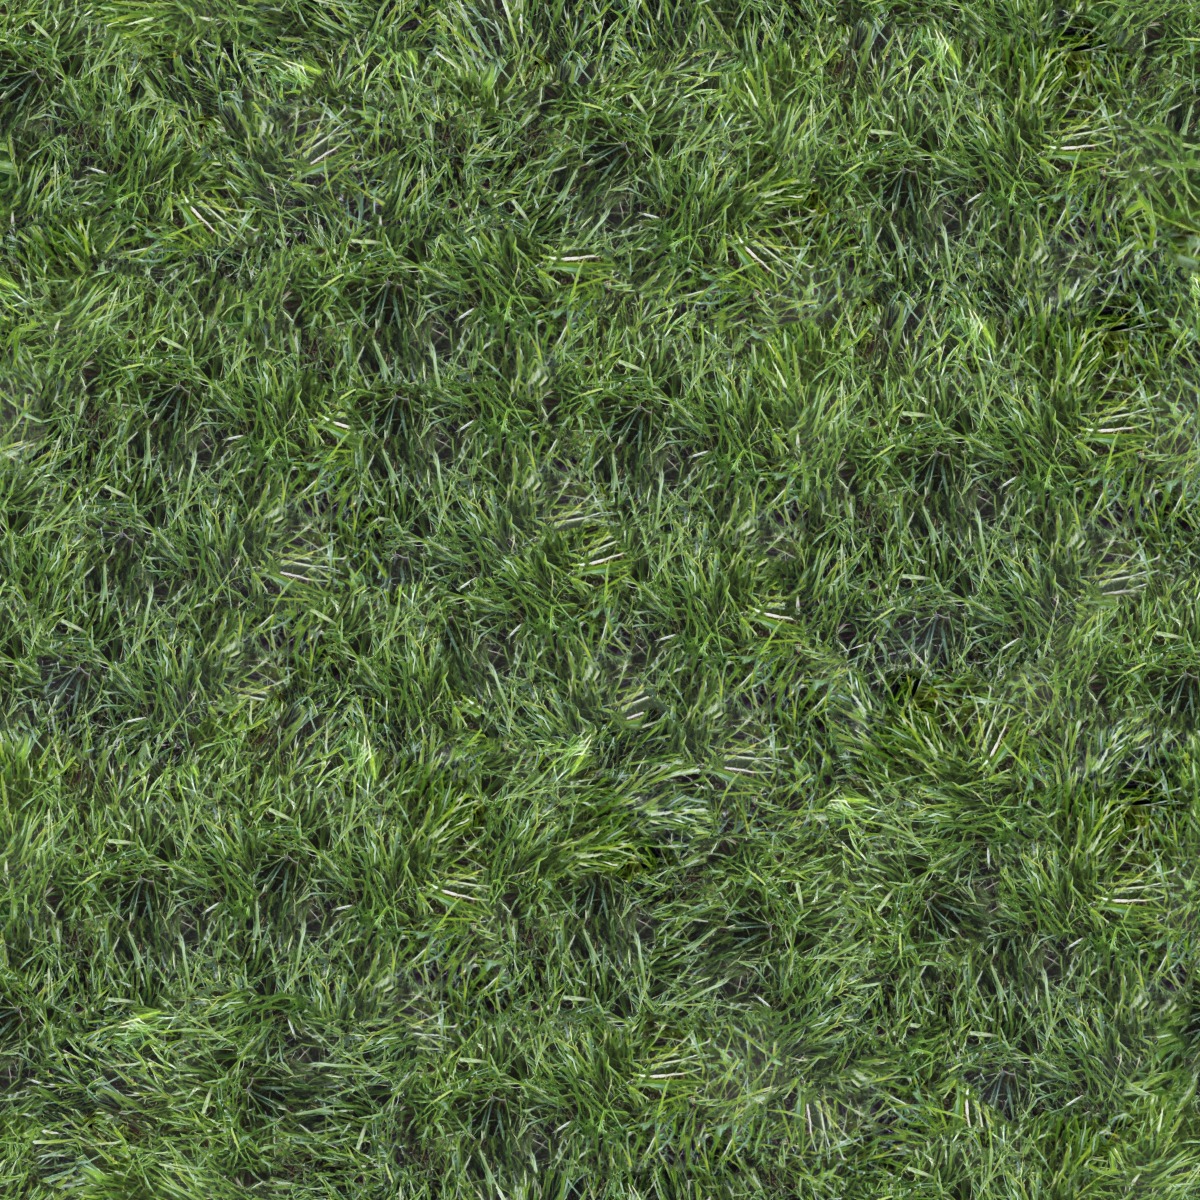 A seamless organic texture with mondo grass units arranged in a None pattern